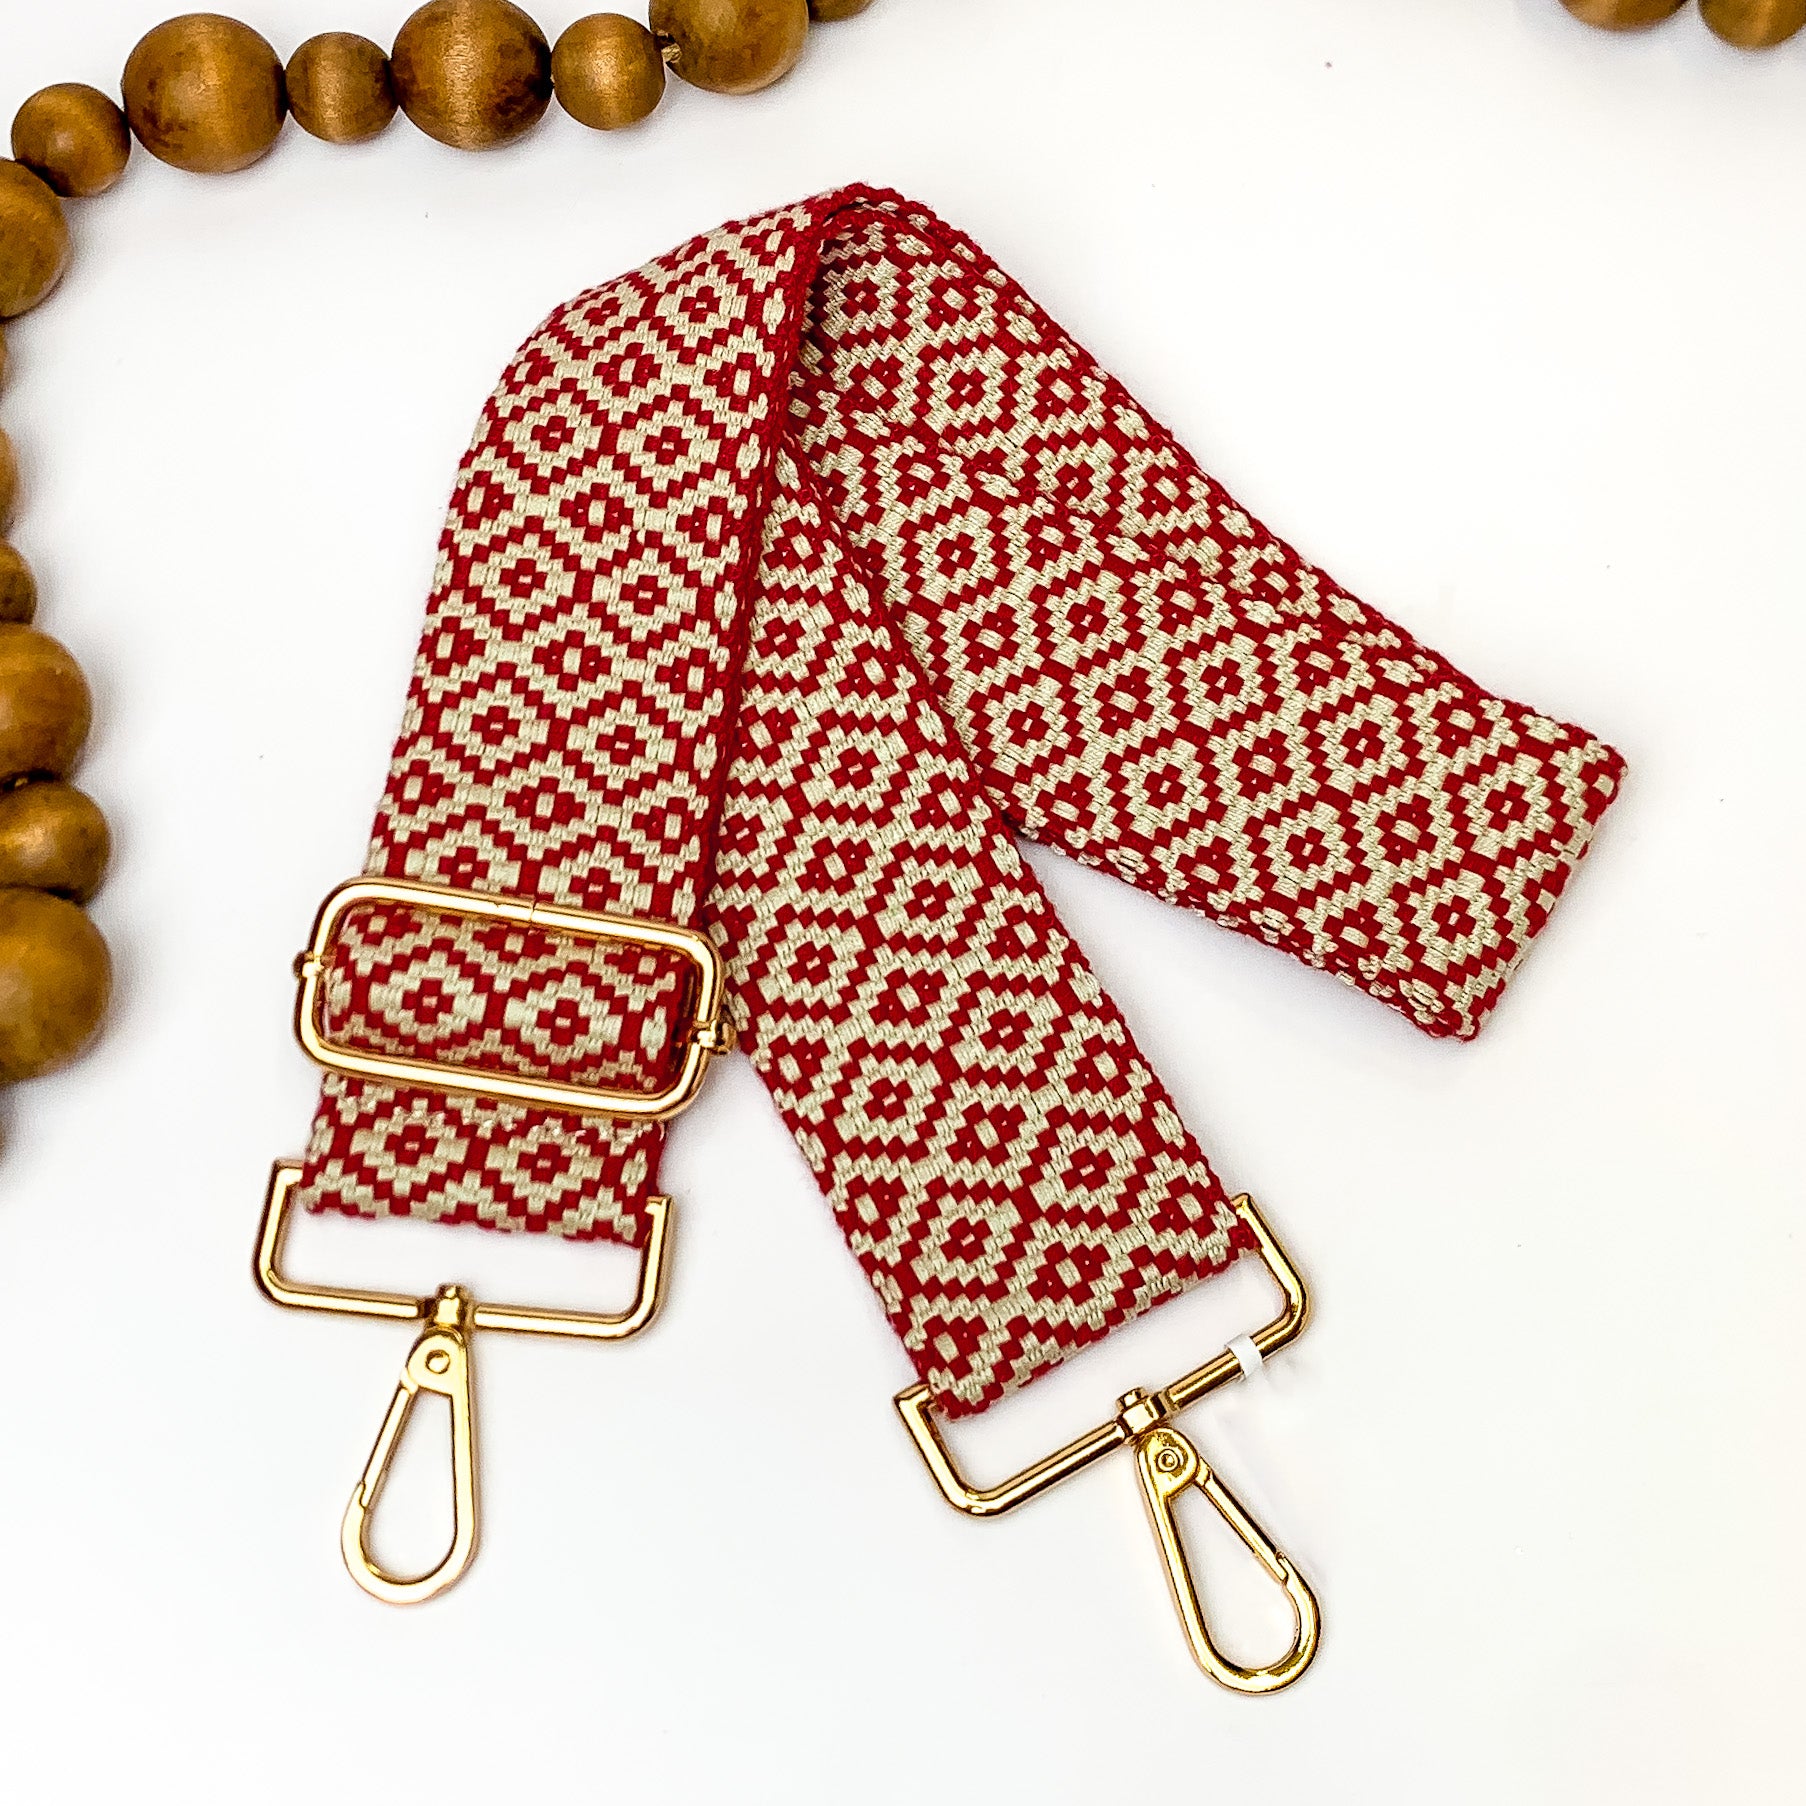 Beaige canvas purse strap with dark red diamond design. This purse strap includes gold accents. This purse strap is pictured on a white background with brown beads at the top.